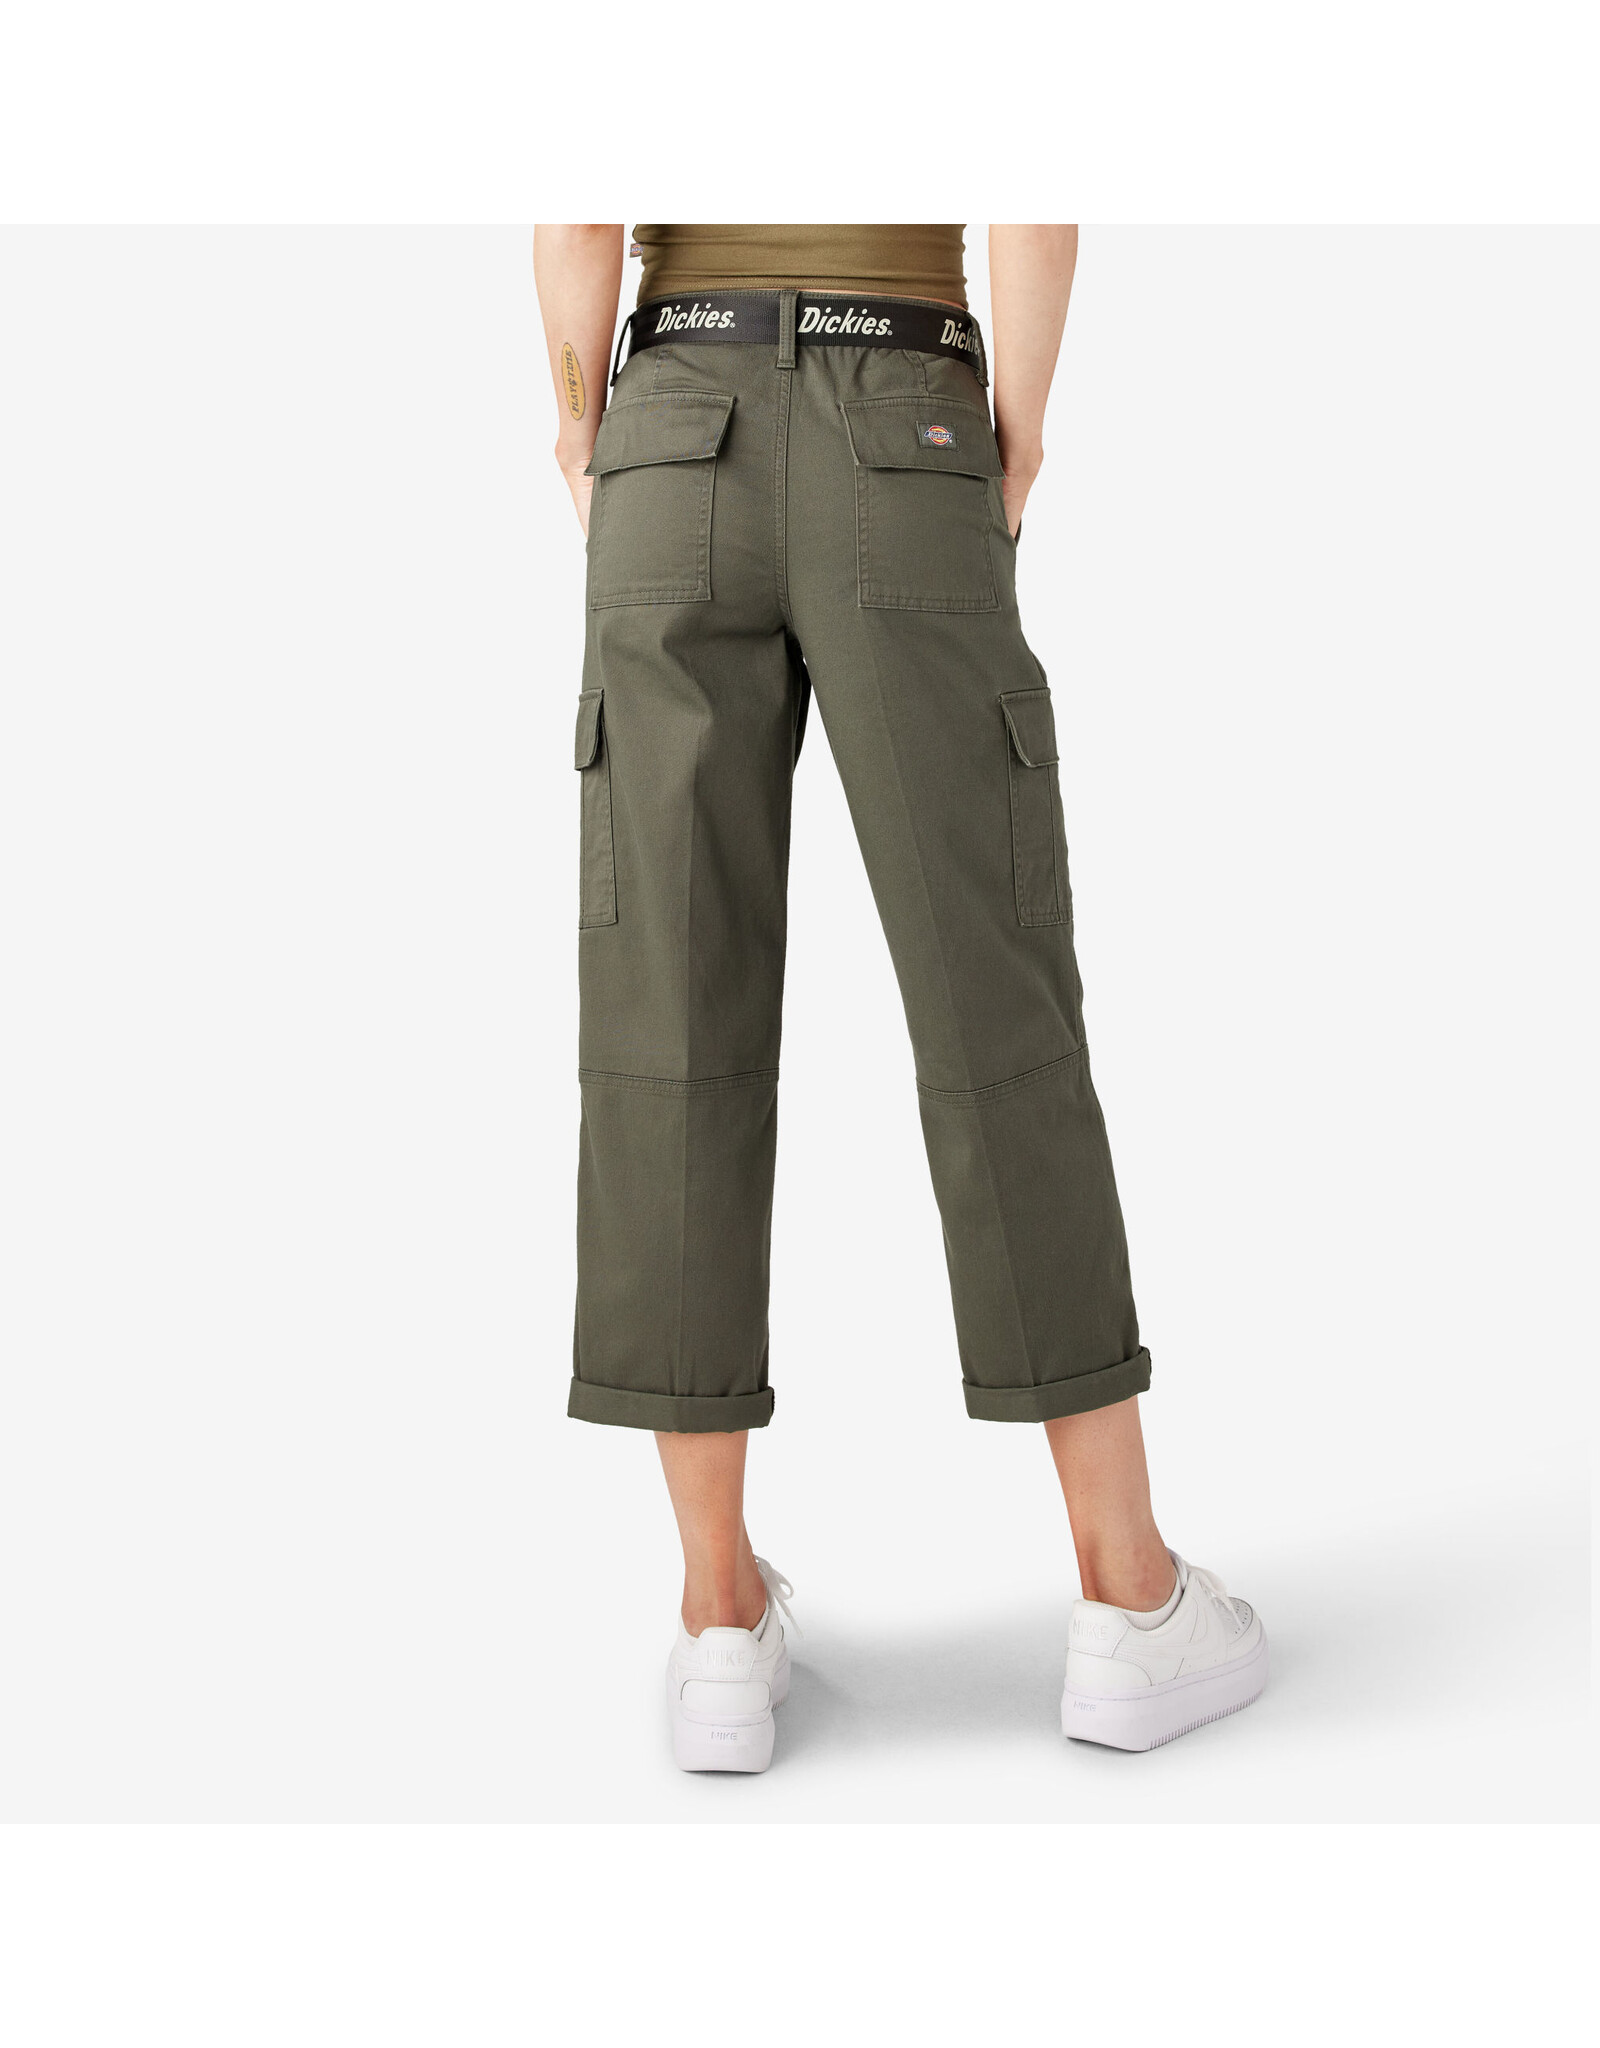 DICKIES Women's Relaxed Fit Cropped Cargo Pants Olive Green - FPR50OG